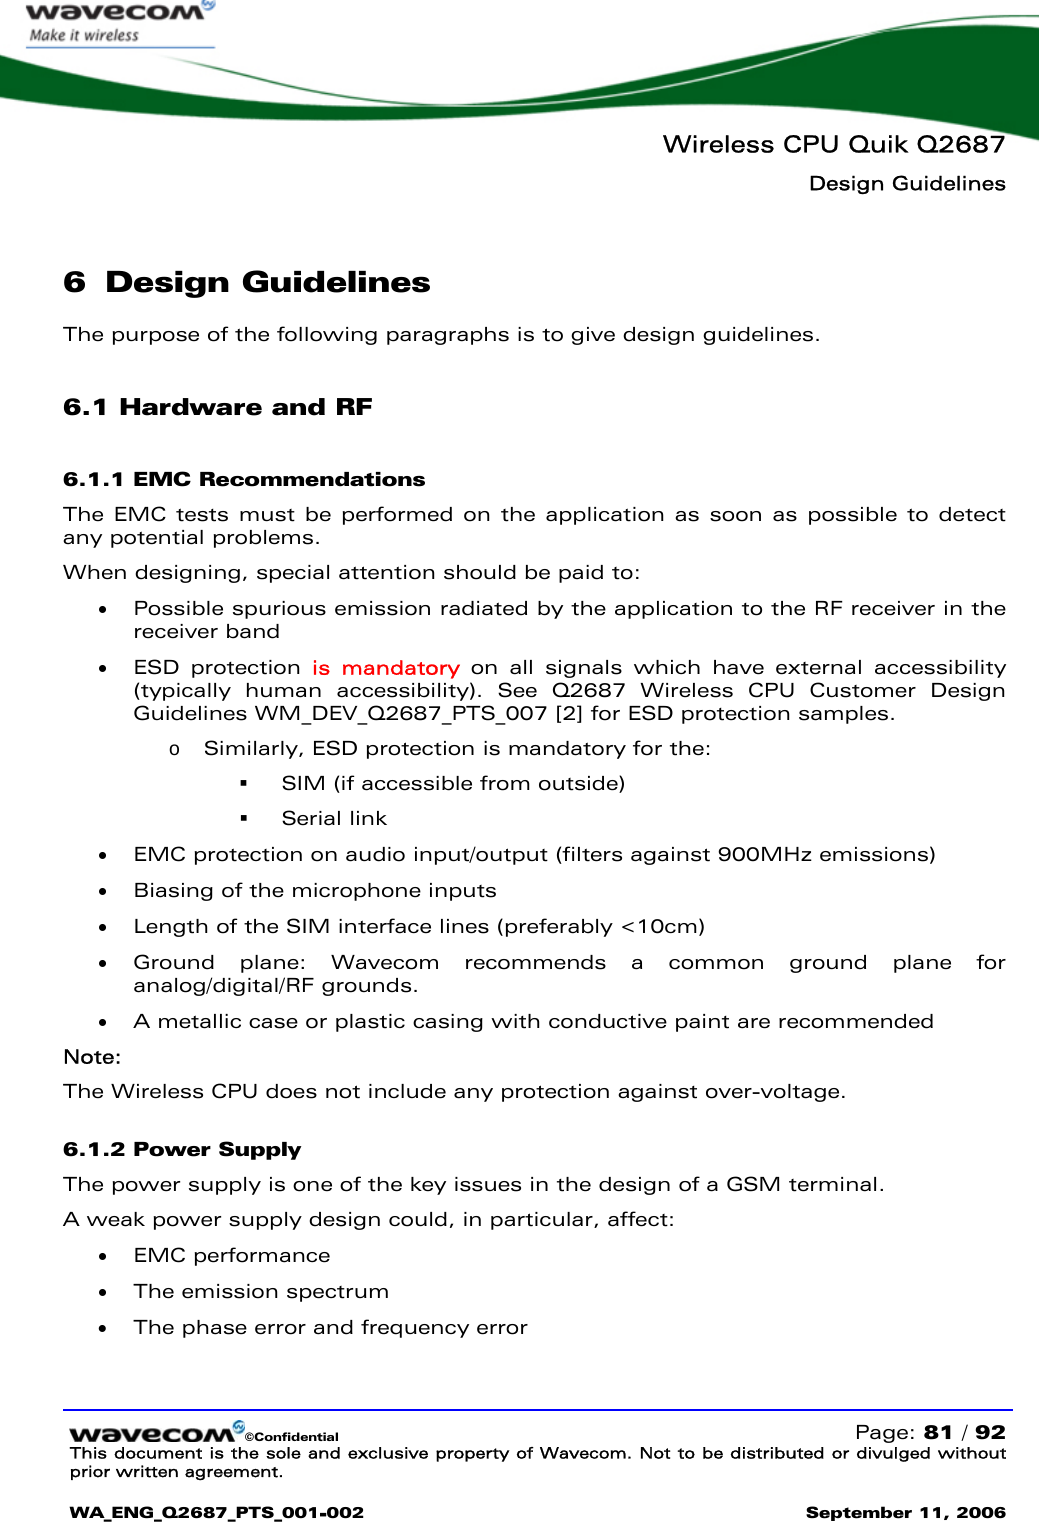   Wireless CPU Quik Q2687 Design Guidelines   ©Confidential   Page: 81 / 92 This document is the sole and exclusive property of Wavecom. Not to be distributed or divulged without prior written agreement.  WA_ENG_Q2687_PTS_001-002 September 11, 2006   6 Design Guidelines The purpose of the following paragraphs is to give design guidelines.  6.1 Hardware and RF 6.1.1 EMC Recommendations The EMC tests must be performed on the application as soon as possible to detect any potential problems. When designing, special attention should be paid to: • Possible spurious emission radiated by the application to the RF receiver in the receiver band • ESD protection is mandatory on all signals which have external accessibility (typically human accessibility). See Q2687 Wireless CPU Customer Design Guidelines WM_DEV_Q2687_PTS_007 [2] for ESD protection samples.  o Similarly, ESD protection is mandatory for the:   SIM (if accessible from outside)   Serial link • EMC protection on audio input/output (filters against 900MHz emissions) • Biasing of the microphone inputs • Length of the SIM interface lines (preferably &lt;10cm) • Ground plane: Wavecom recommends a common ground plane for analog/digital/RF grounds. • A metallic case or plastic casing with conductive paint are recommended Note: The Wireless CPU does not include any protection against over-voltage. 6.1.2 Power Supply The power supply is one of the key issues in the design of a GSM terminal. A weak power supply design could, in particular, affect: • EMC performance • The emission spectrum  • The phase error and frequency error 